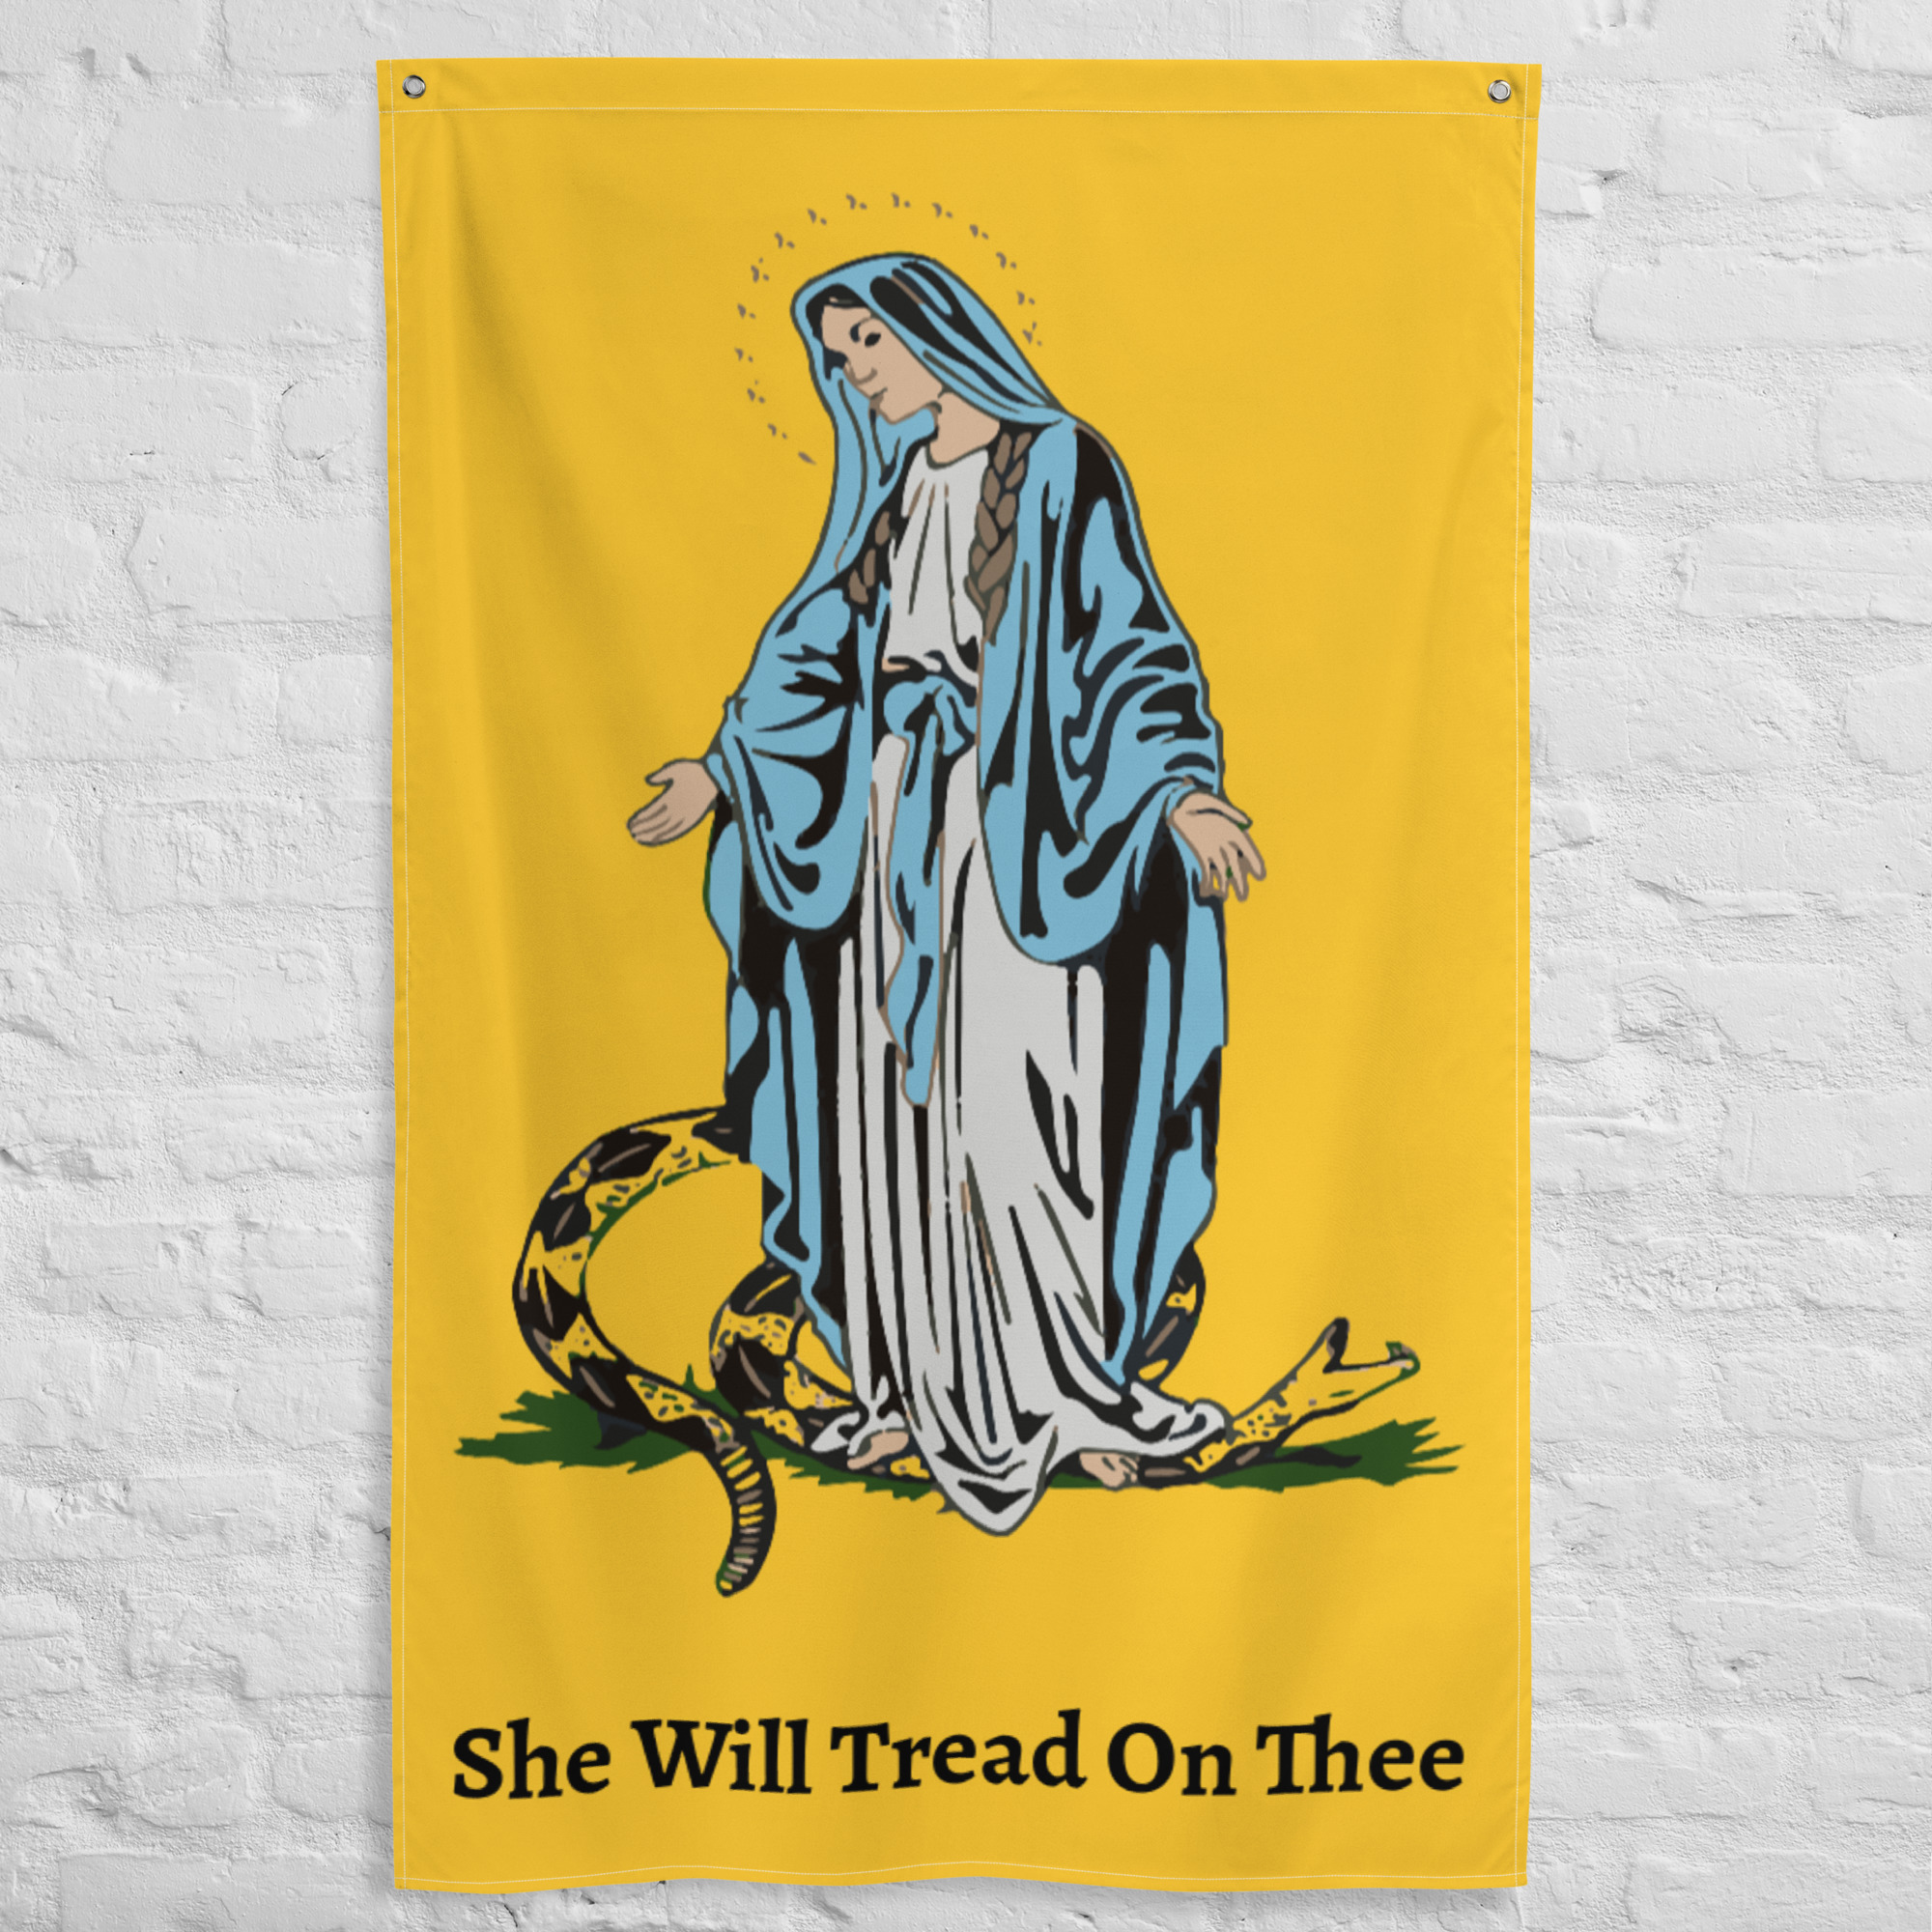 She Will Tread On Thee #Flag vertical